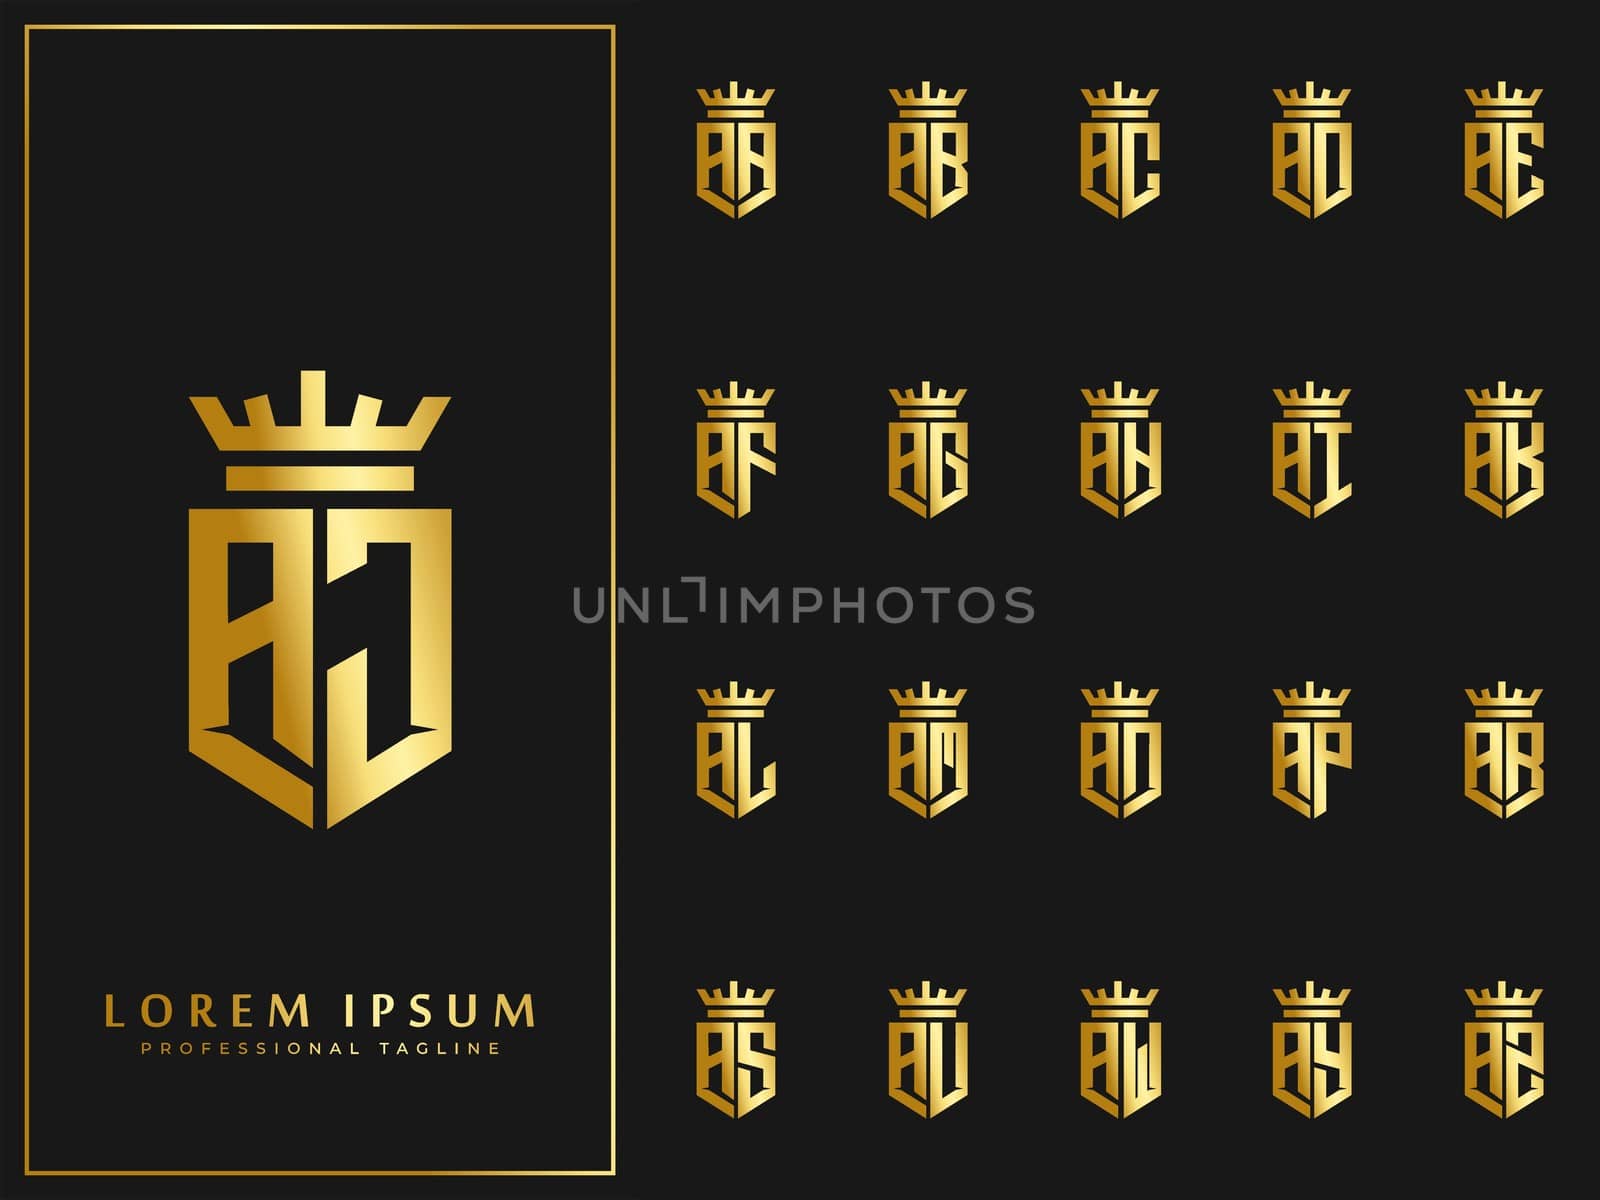 set of initial A letter with crown elements logo template. luxury gold initial shield shape alphabet vector design stock illustration by IreIru